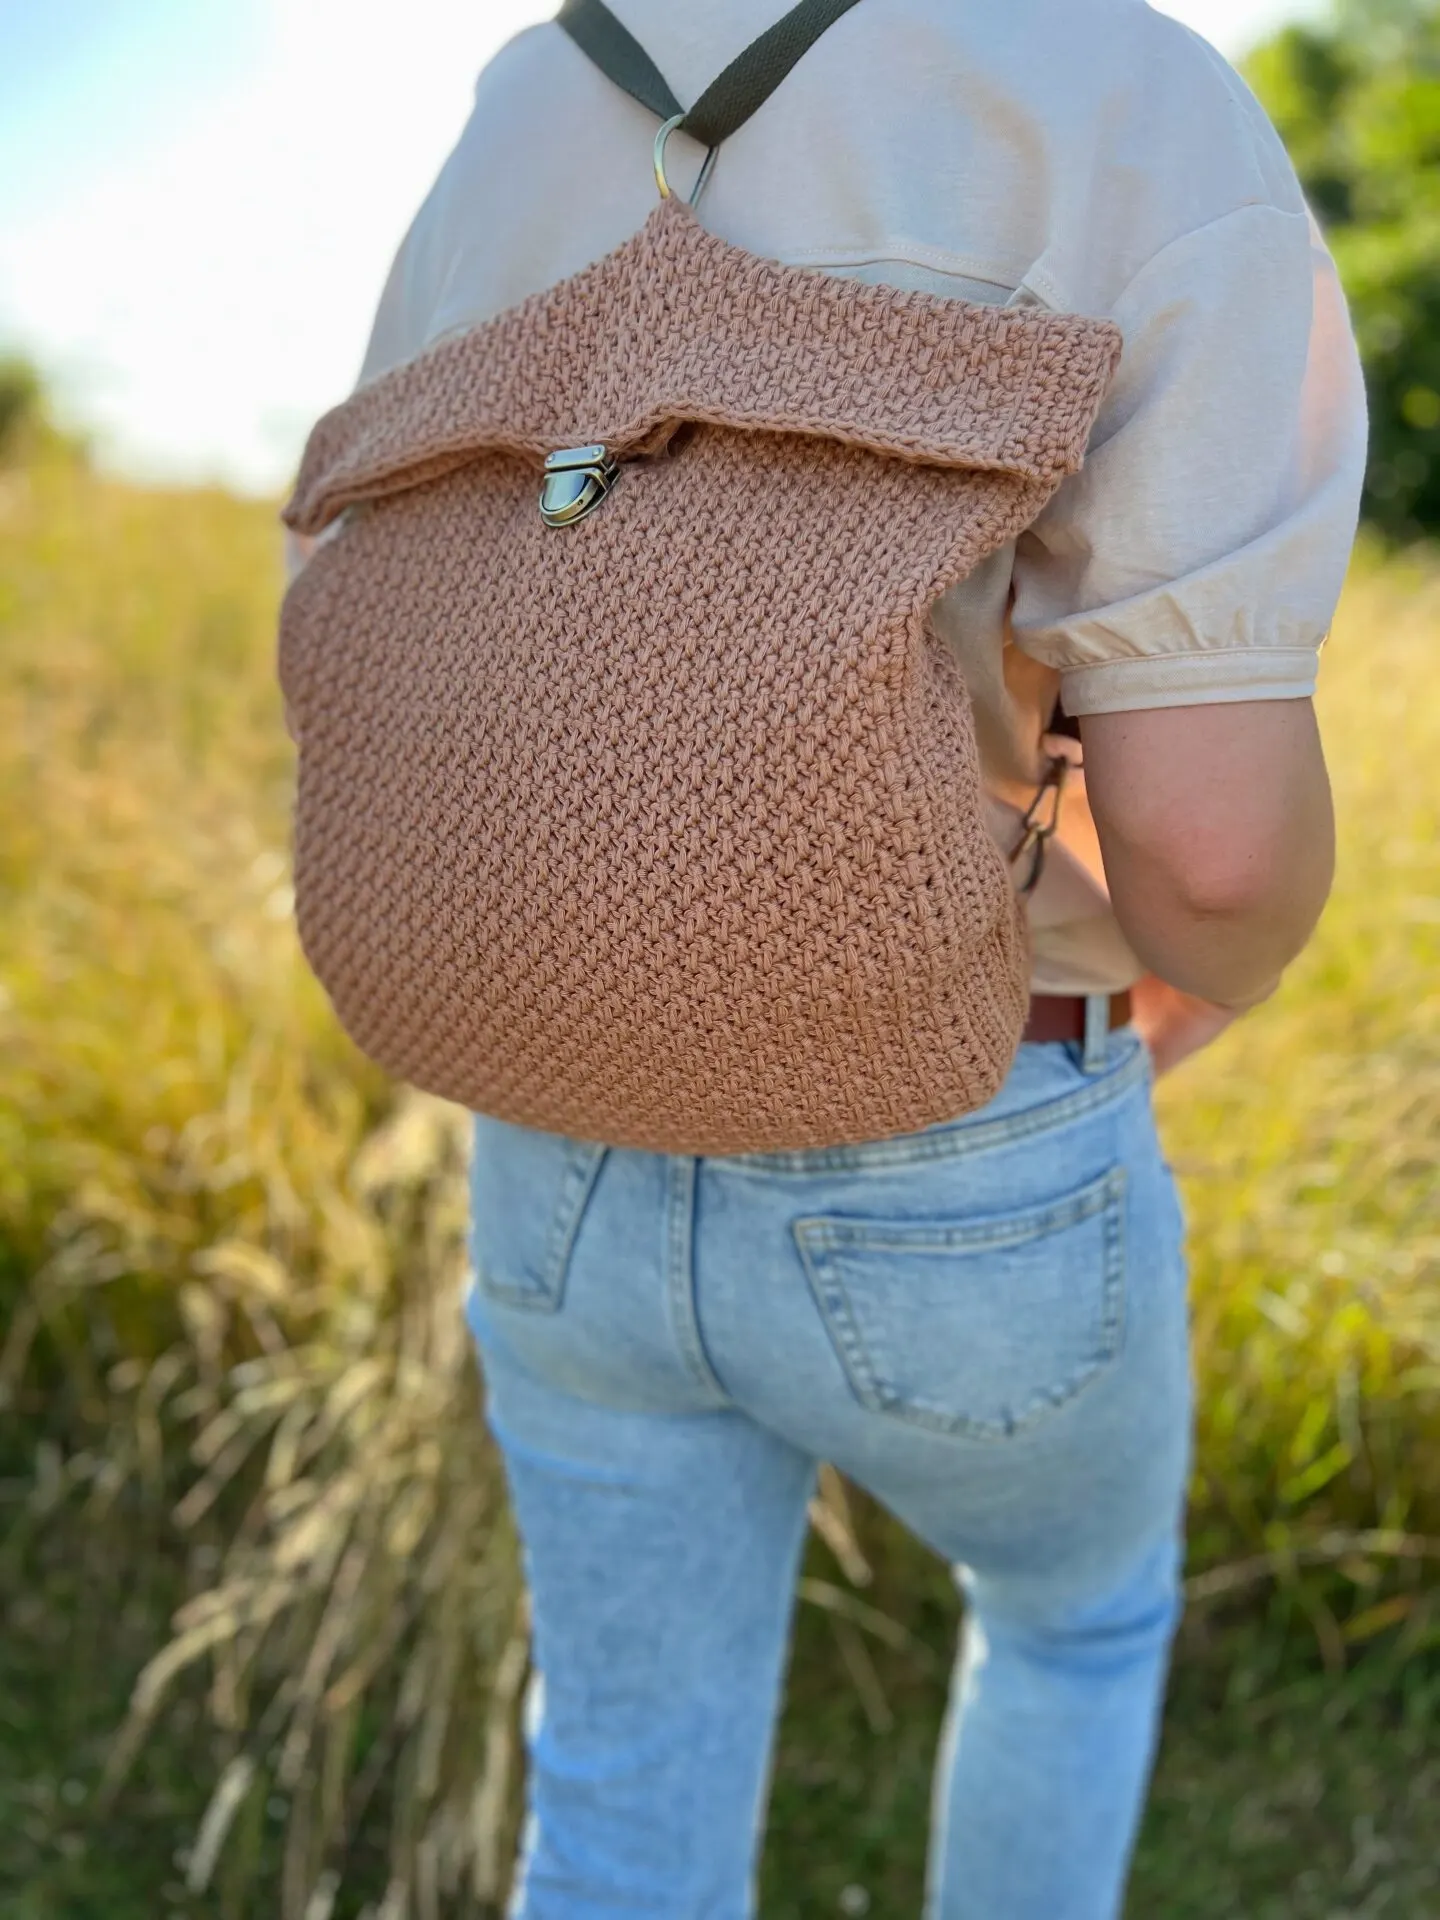 Person walking away wearing jeans and crochet backpack in brown.